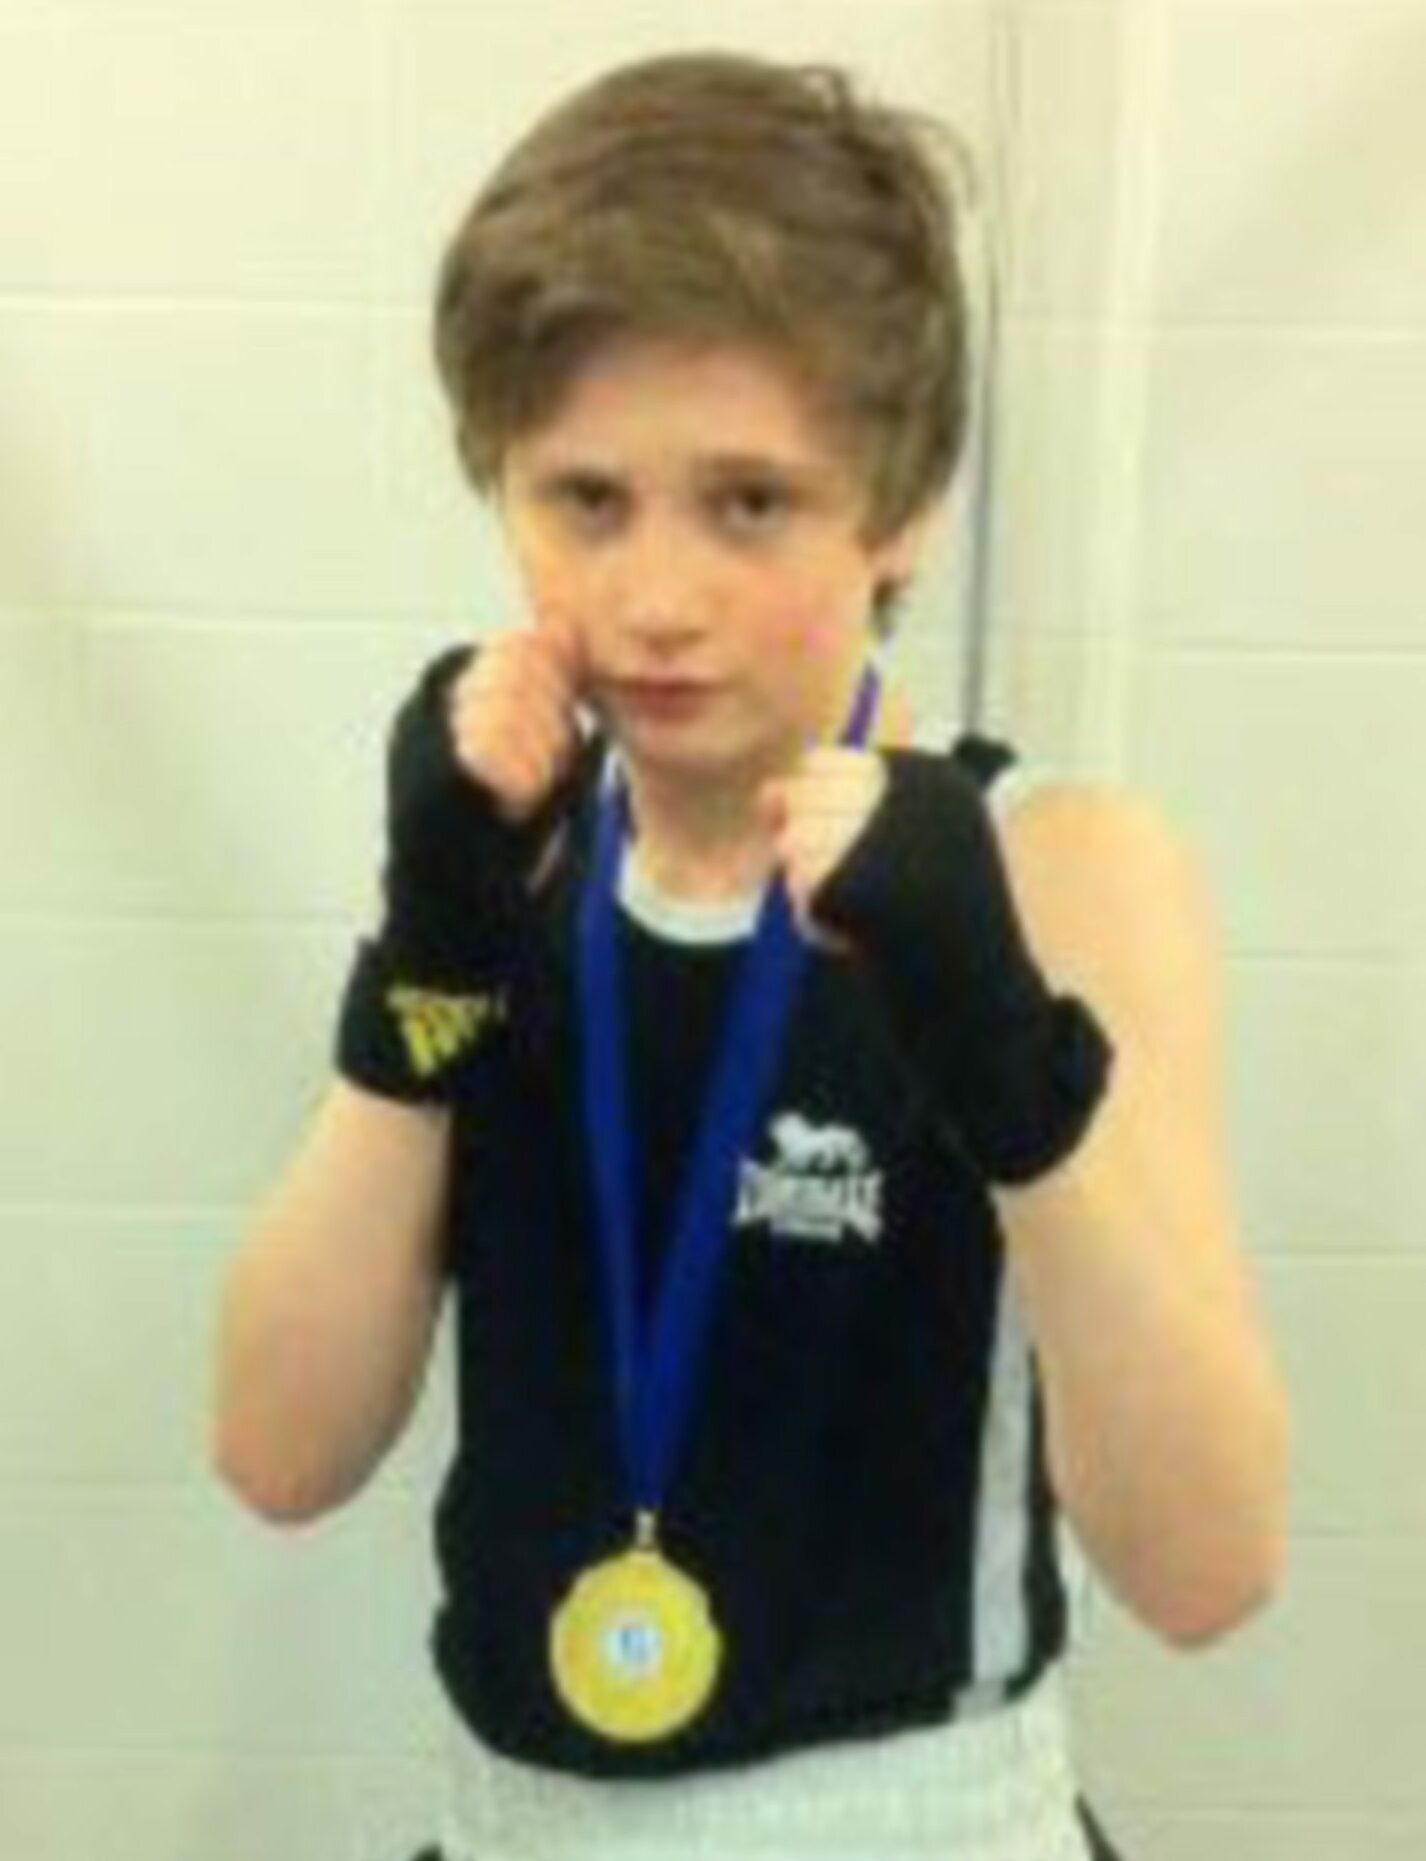 A young Sam Hickey after winning gold in his weight class at the Intermediate Scottish Championships in 2013.